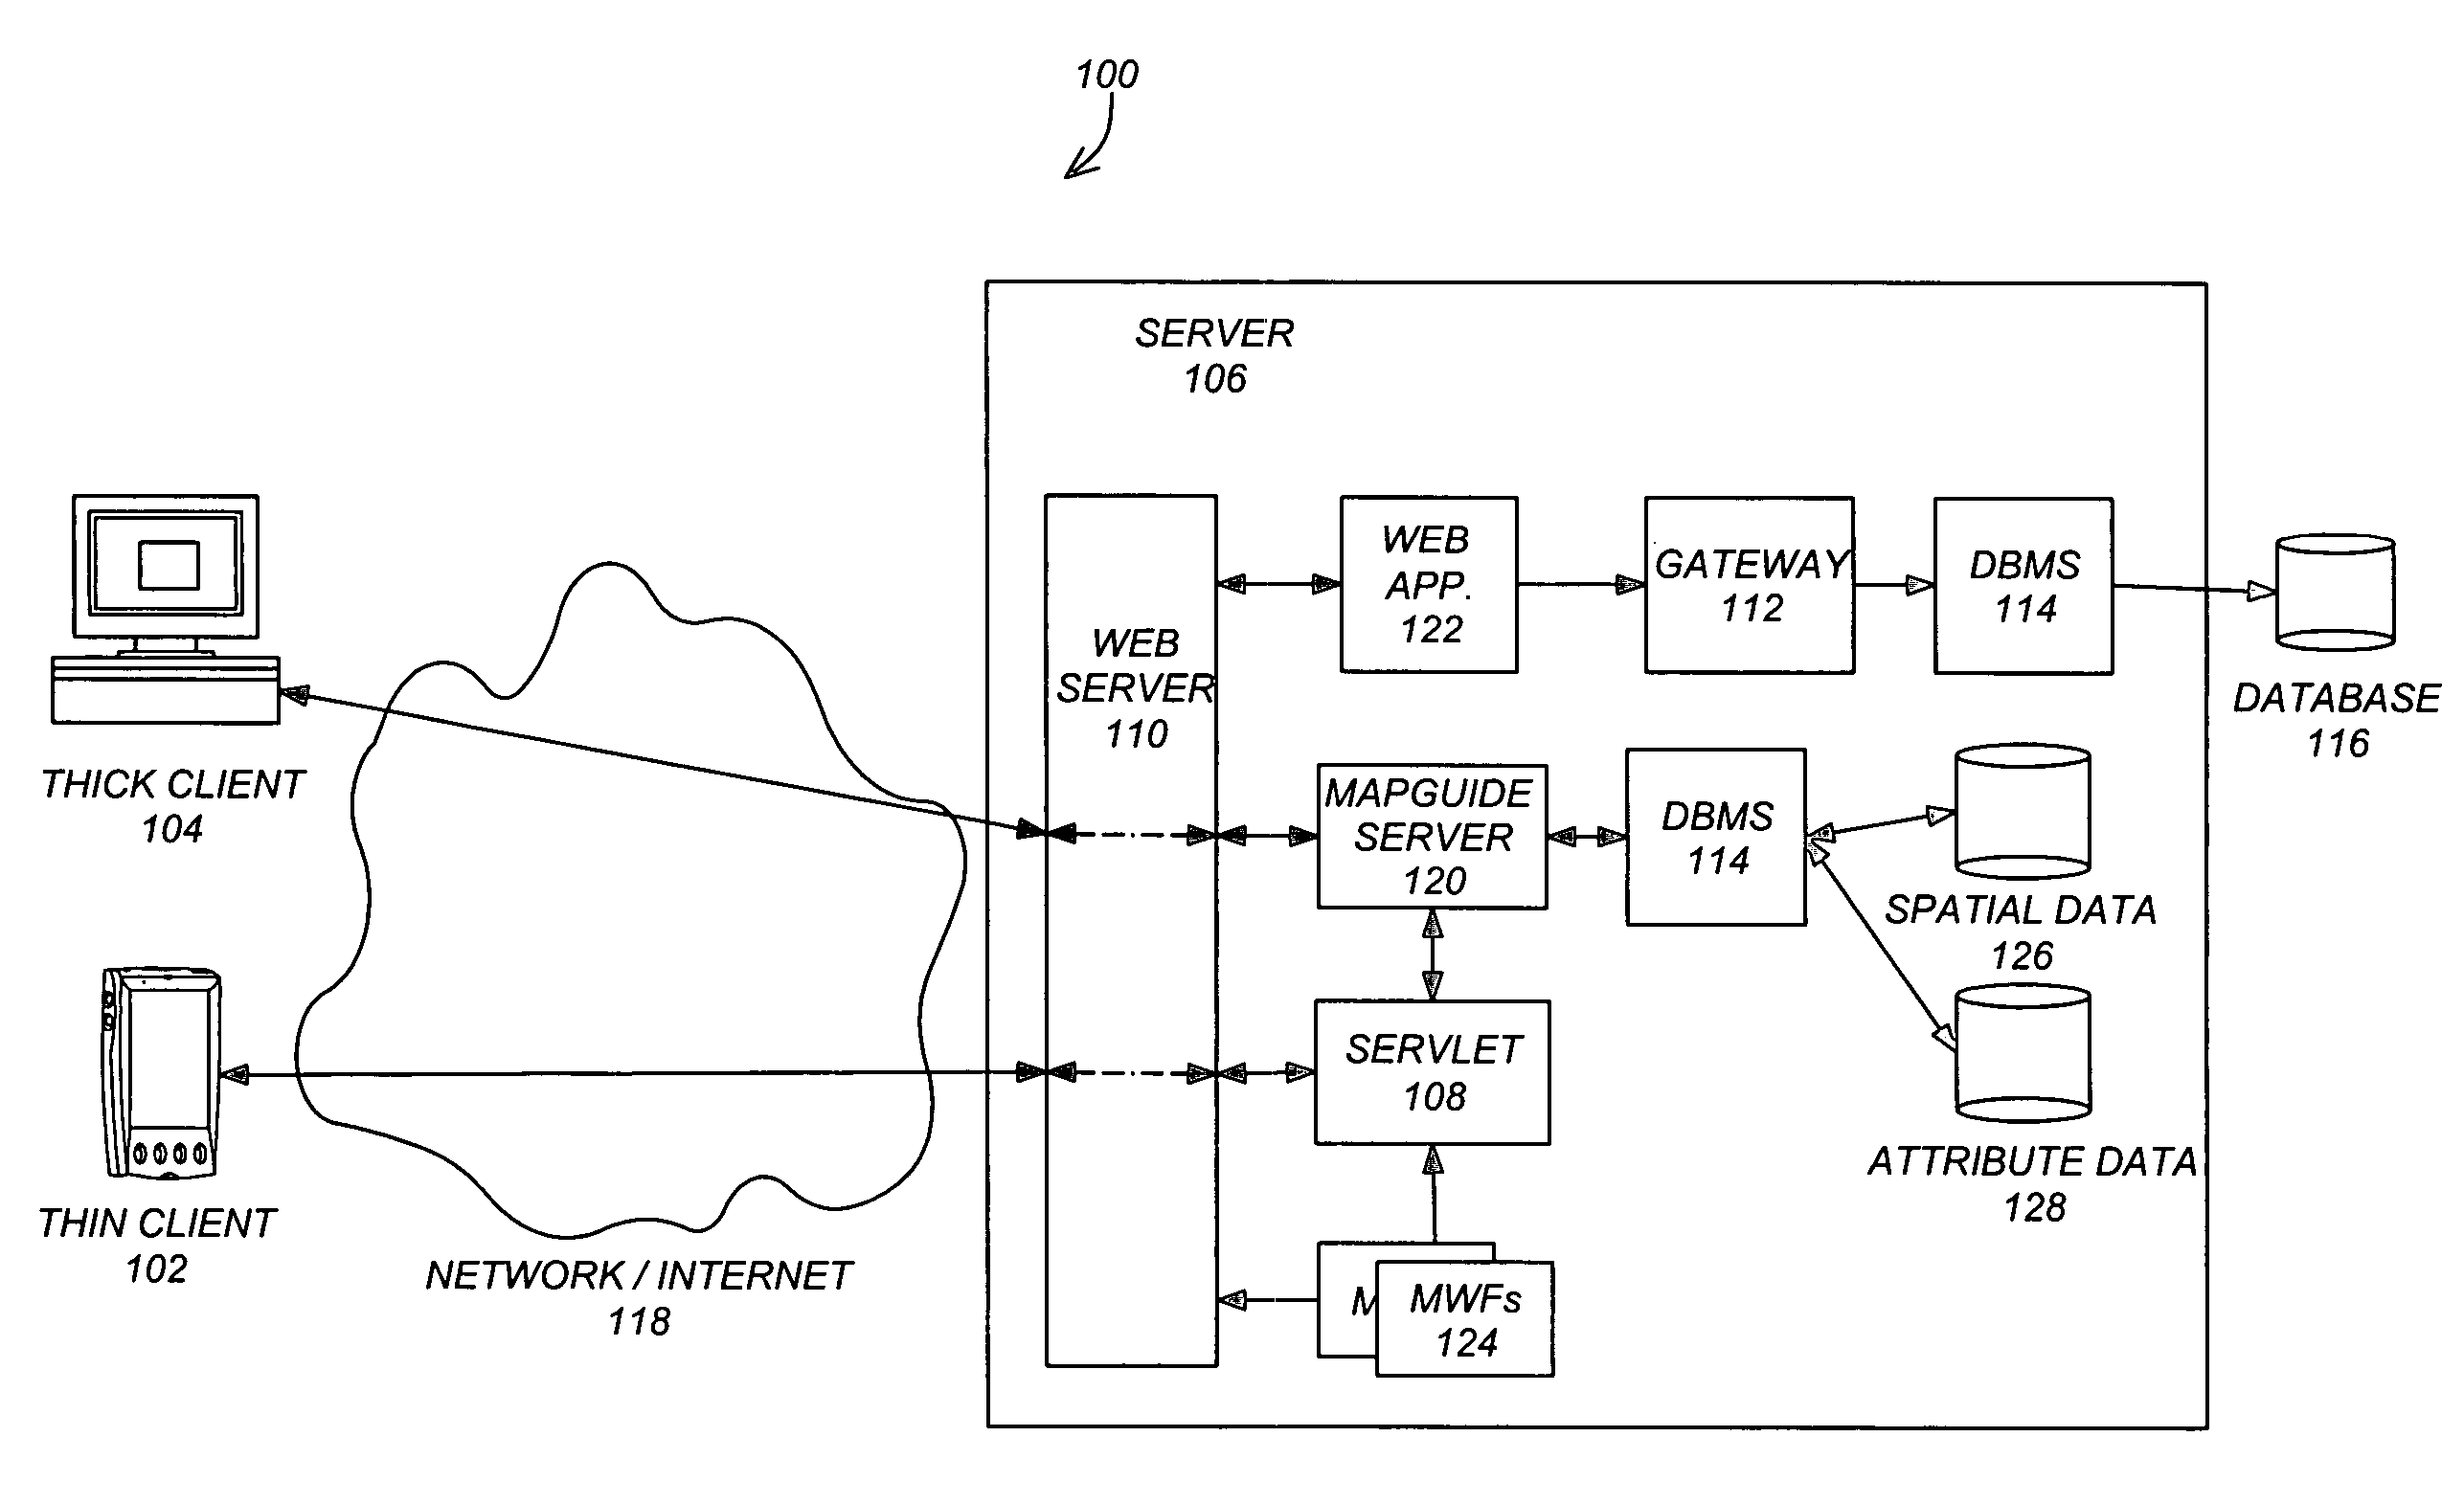 Method and apparatus for providing access to maps on a thin client